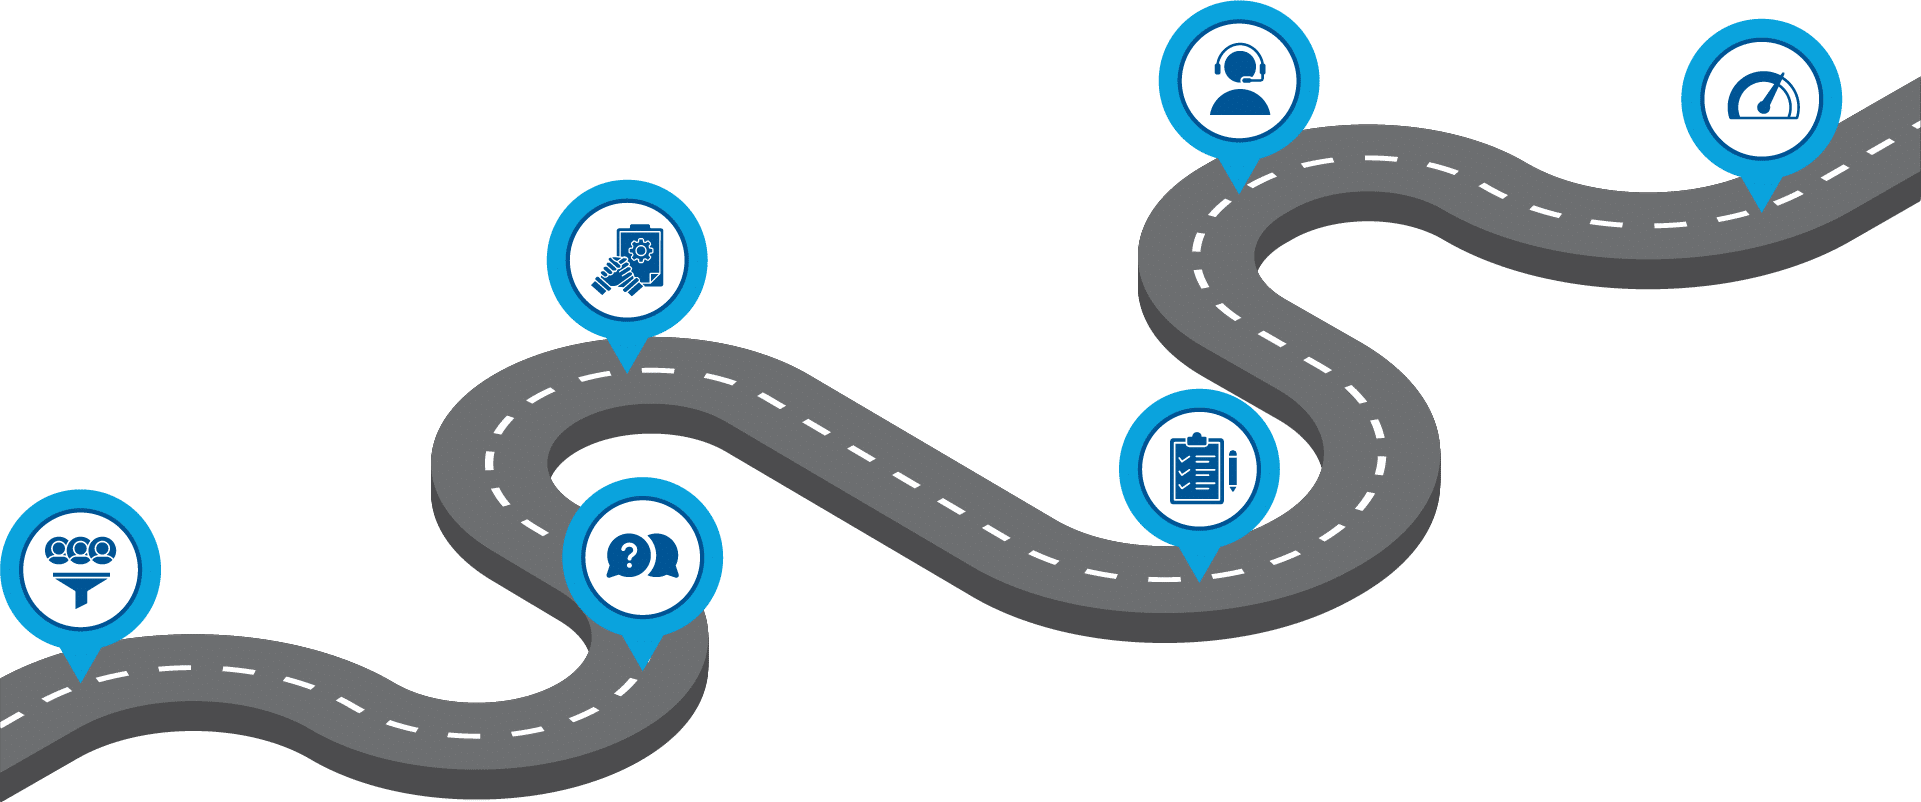 Illustration of a curvy gray road with blue and white markers. Dark blue icons represent the steps in Career Connections' staffing process: Pre-Screening, In-Person Interview, Onboarding, Assessment, In-Person Tour, and Ongoing Performance Management.